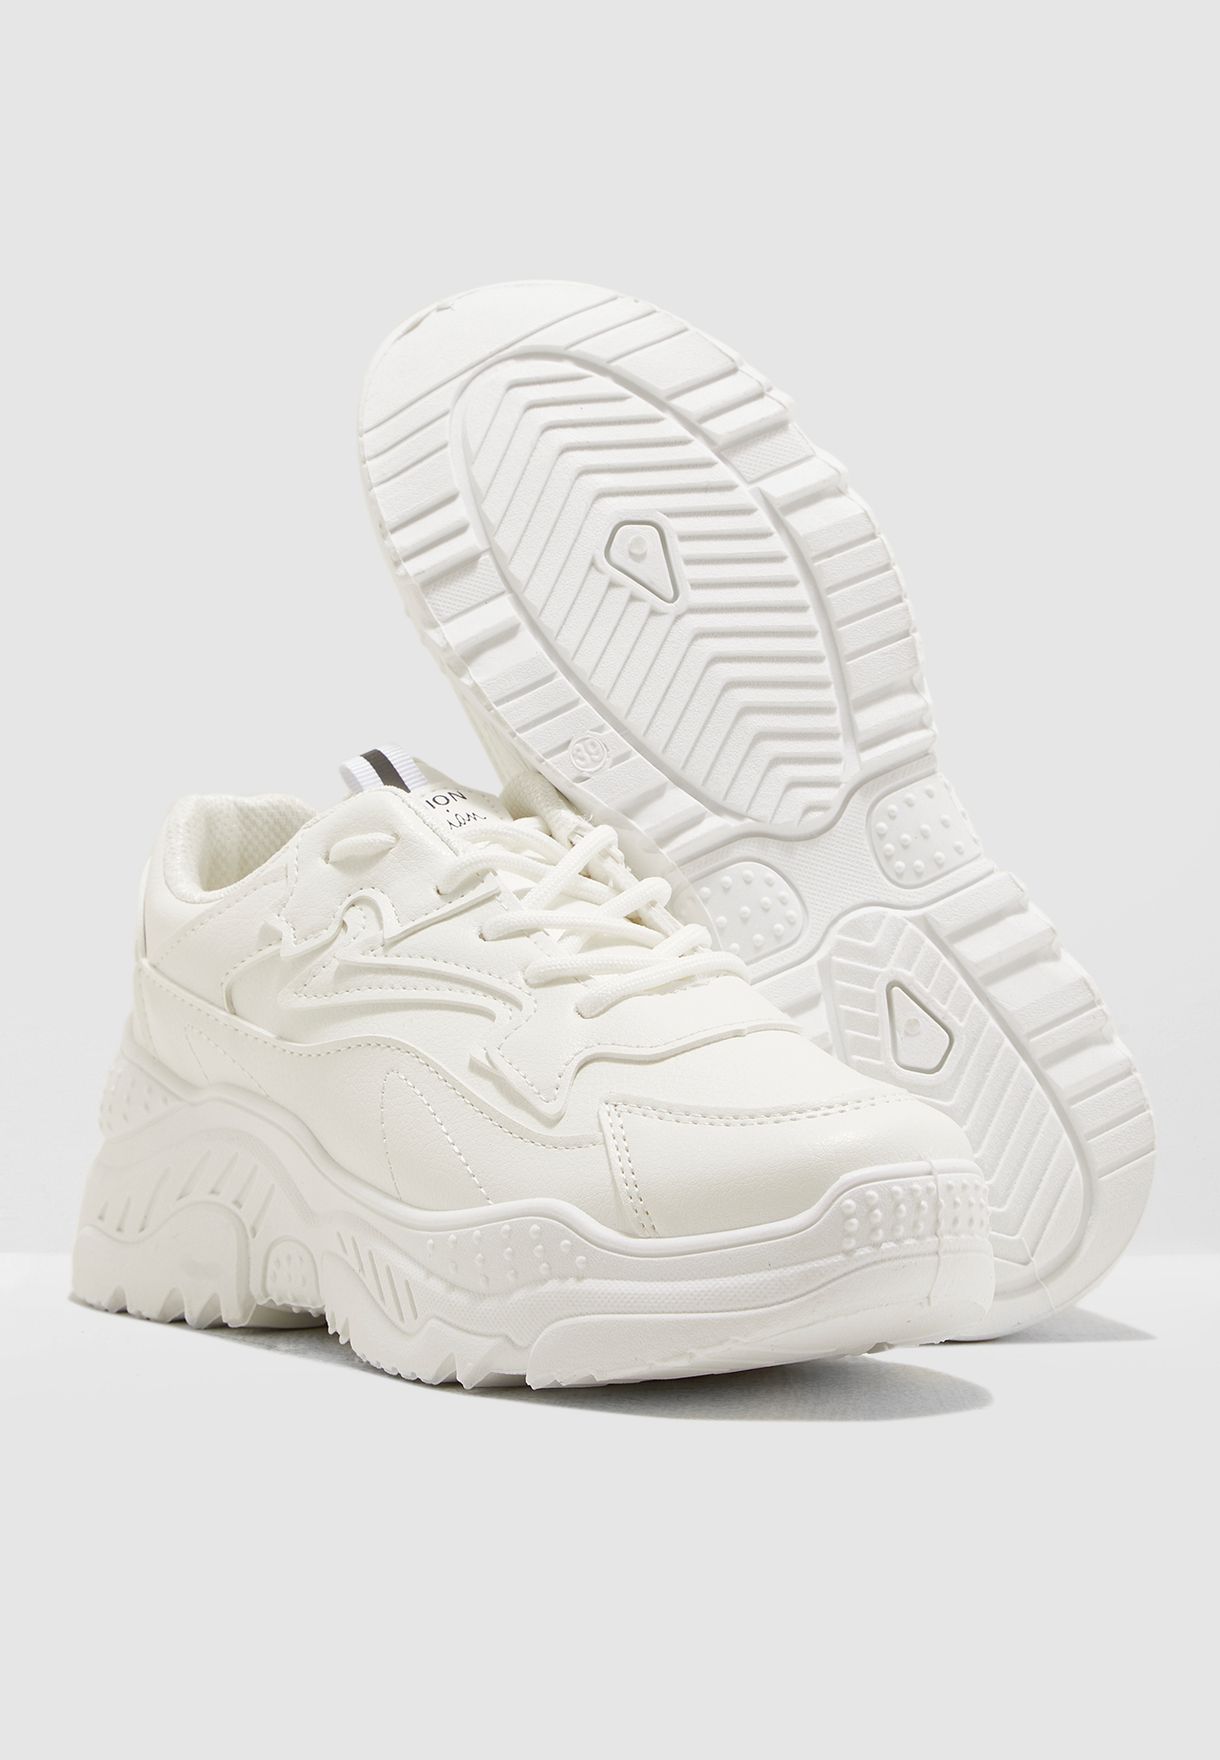 clunky white sneakers